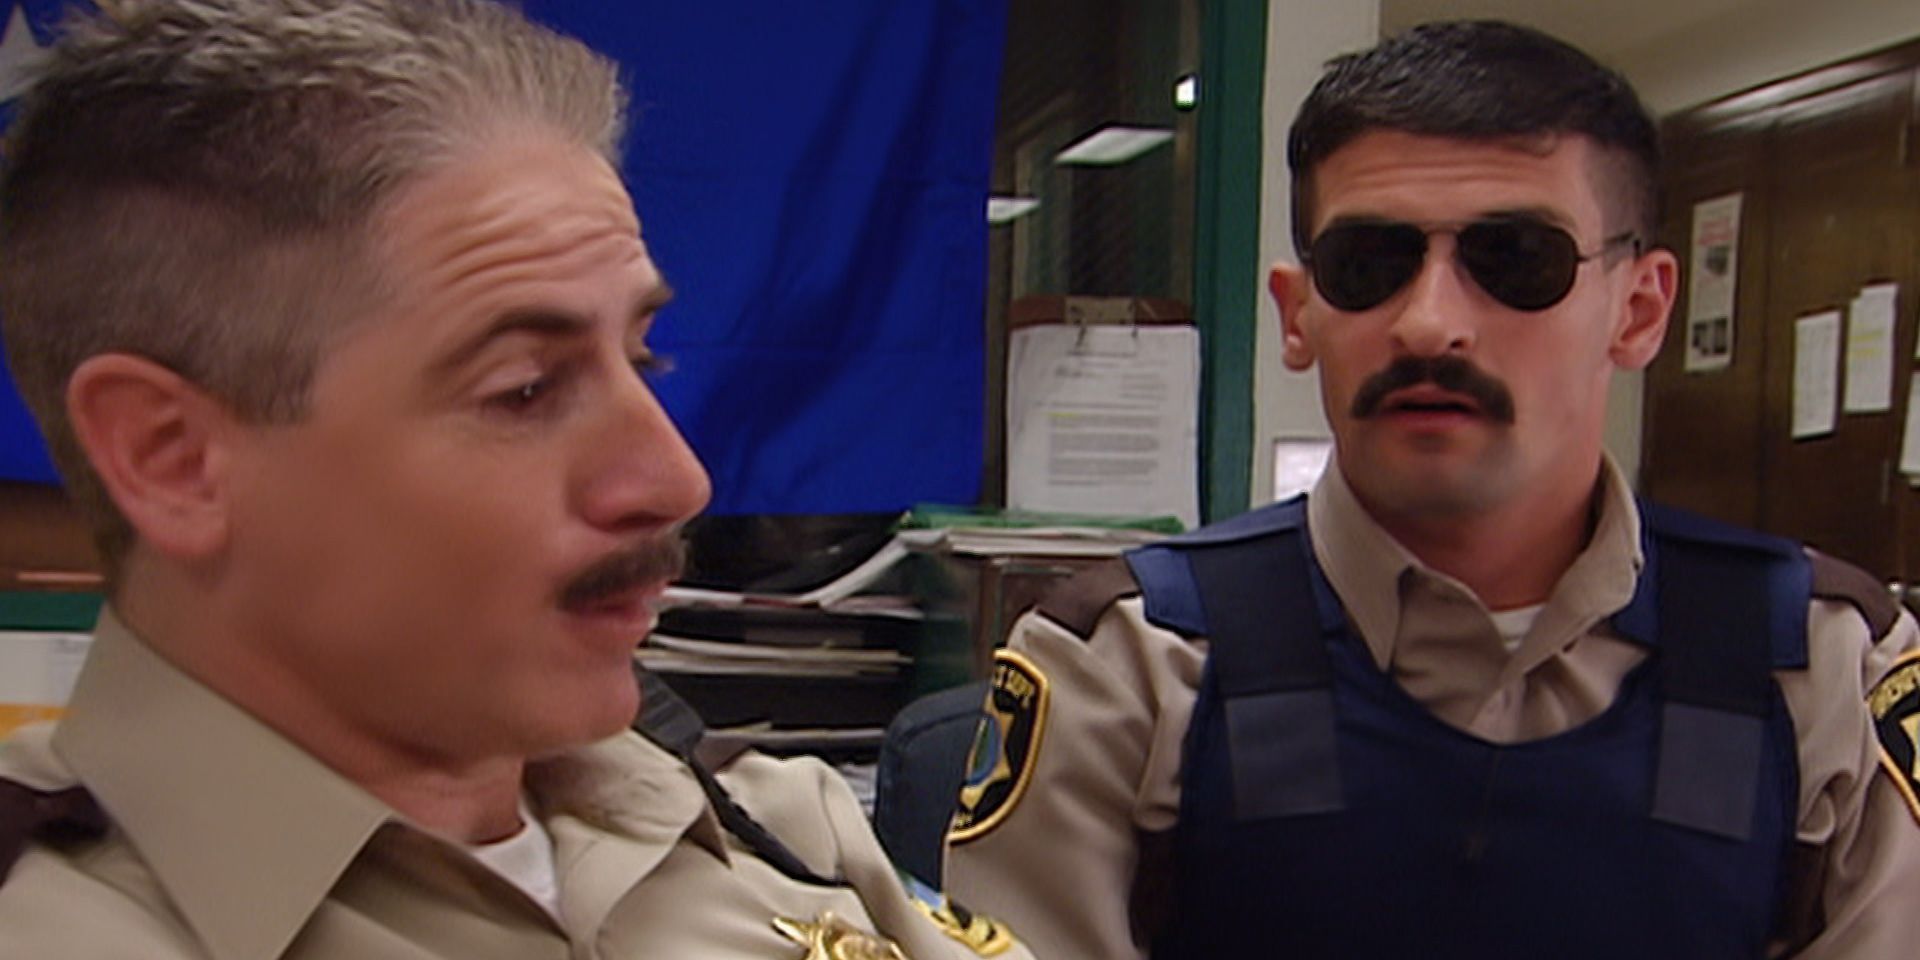 Two Reno 911 characters with mustaches